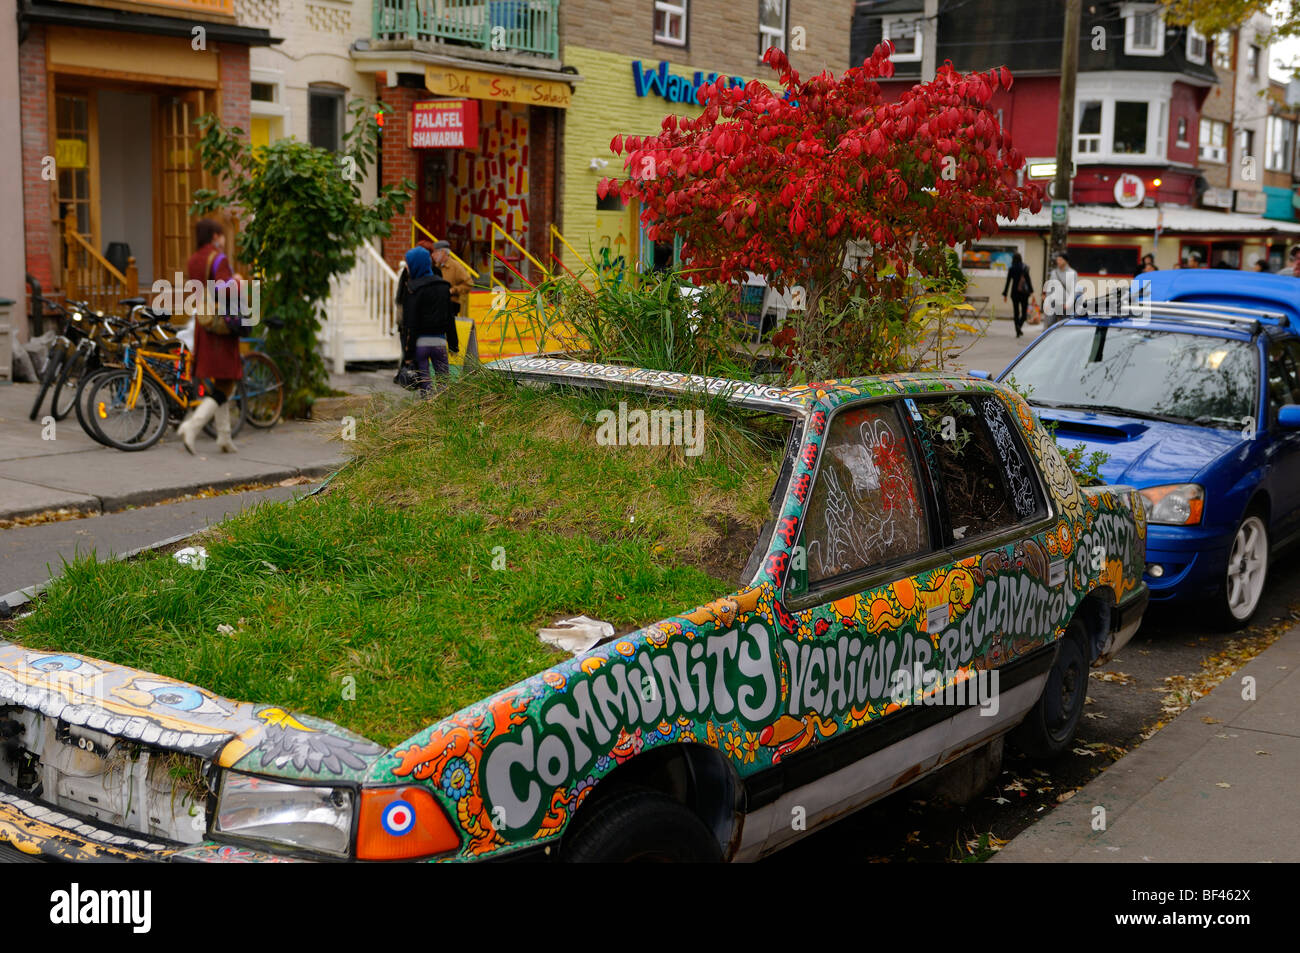 Wacky junked car parked on Toronto street filled with earth and growing grass and red burning bush Community Vehicular Reclamation Project Stock Photo